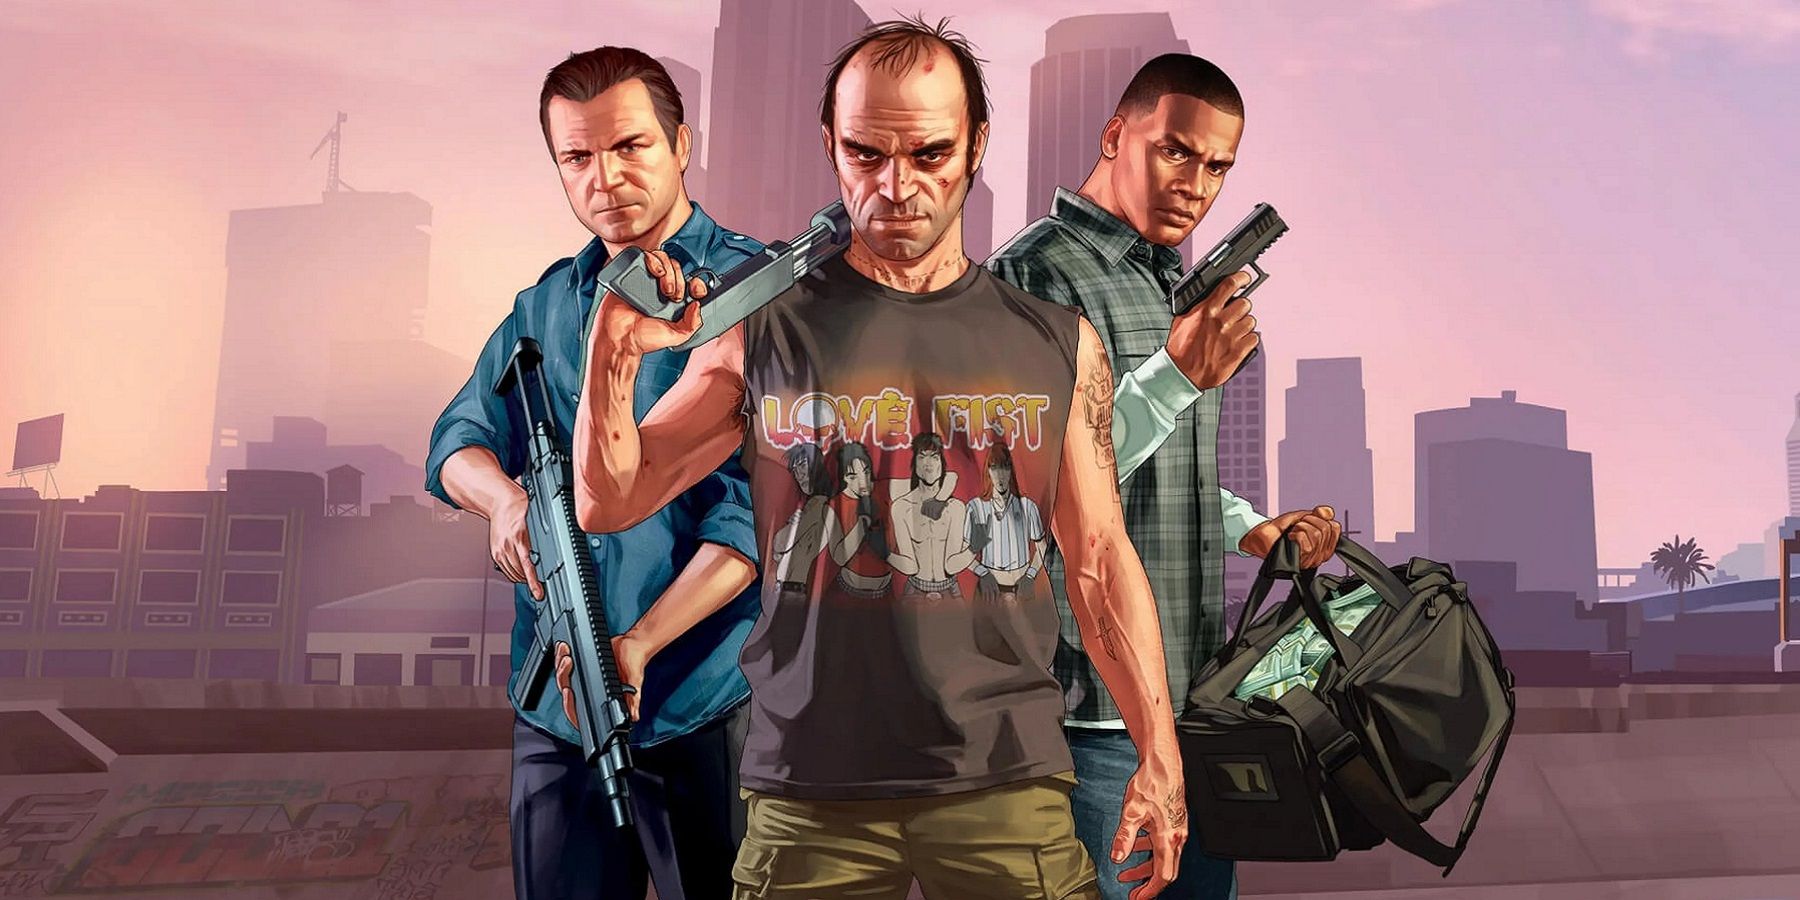 Image from Grand Theft Auto 5 showing Michael, Trevor, and Franklin all holding guns.